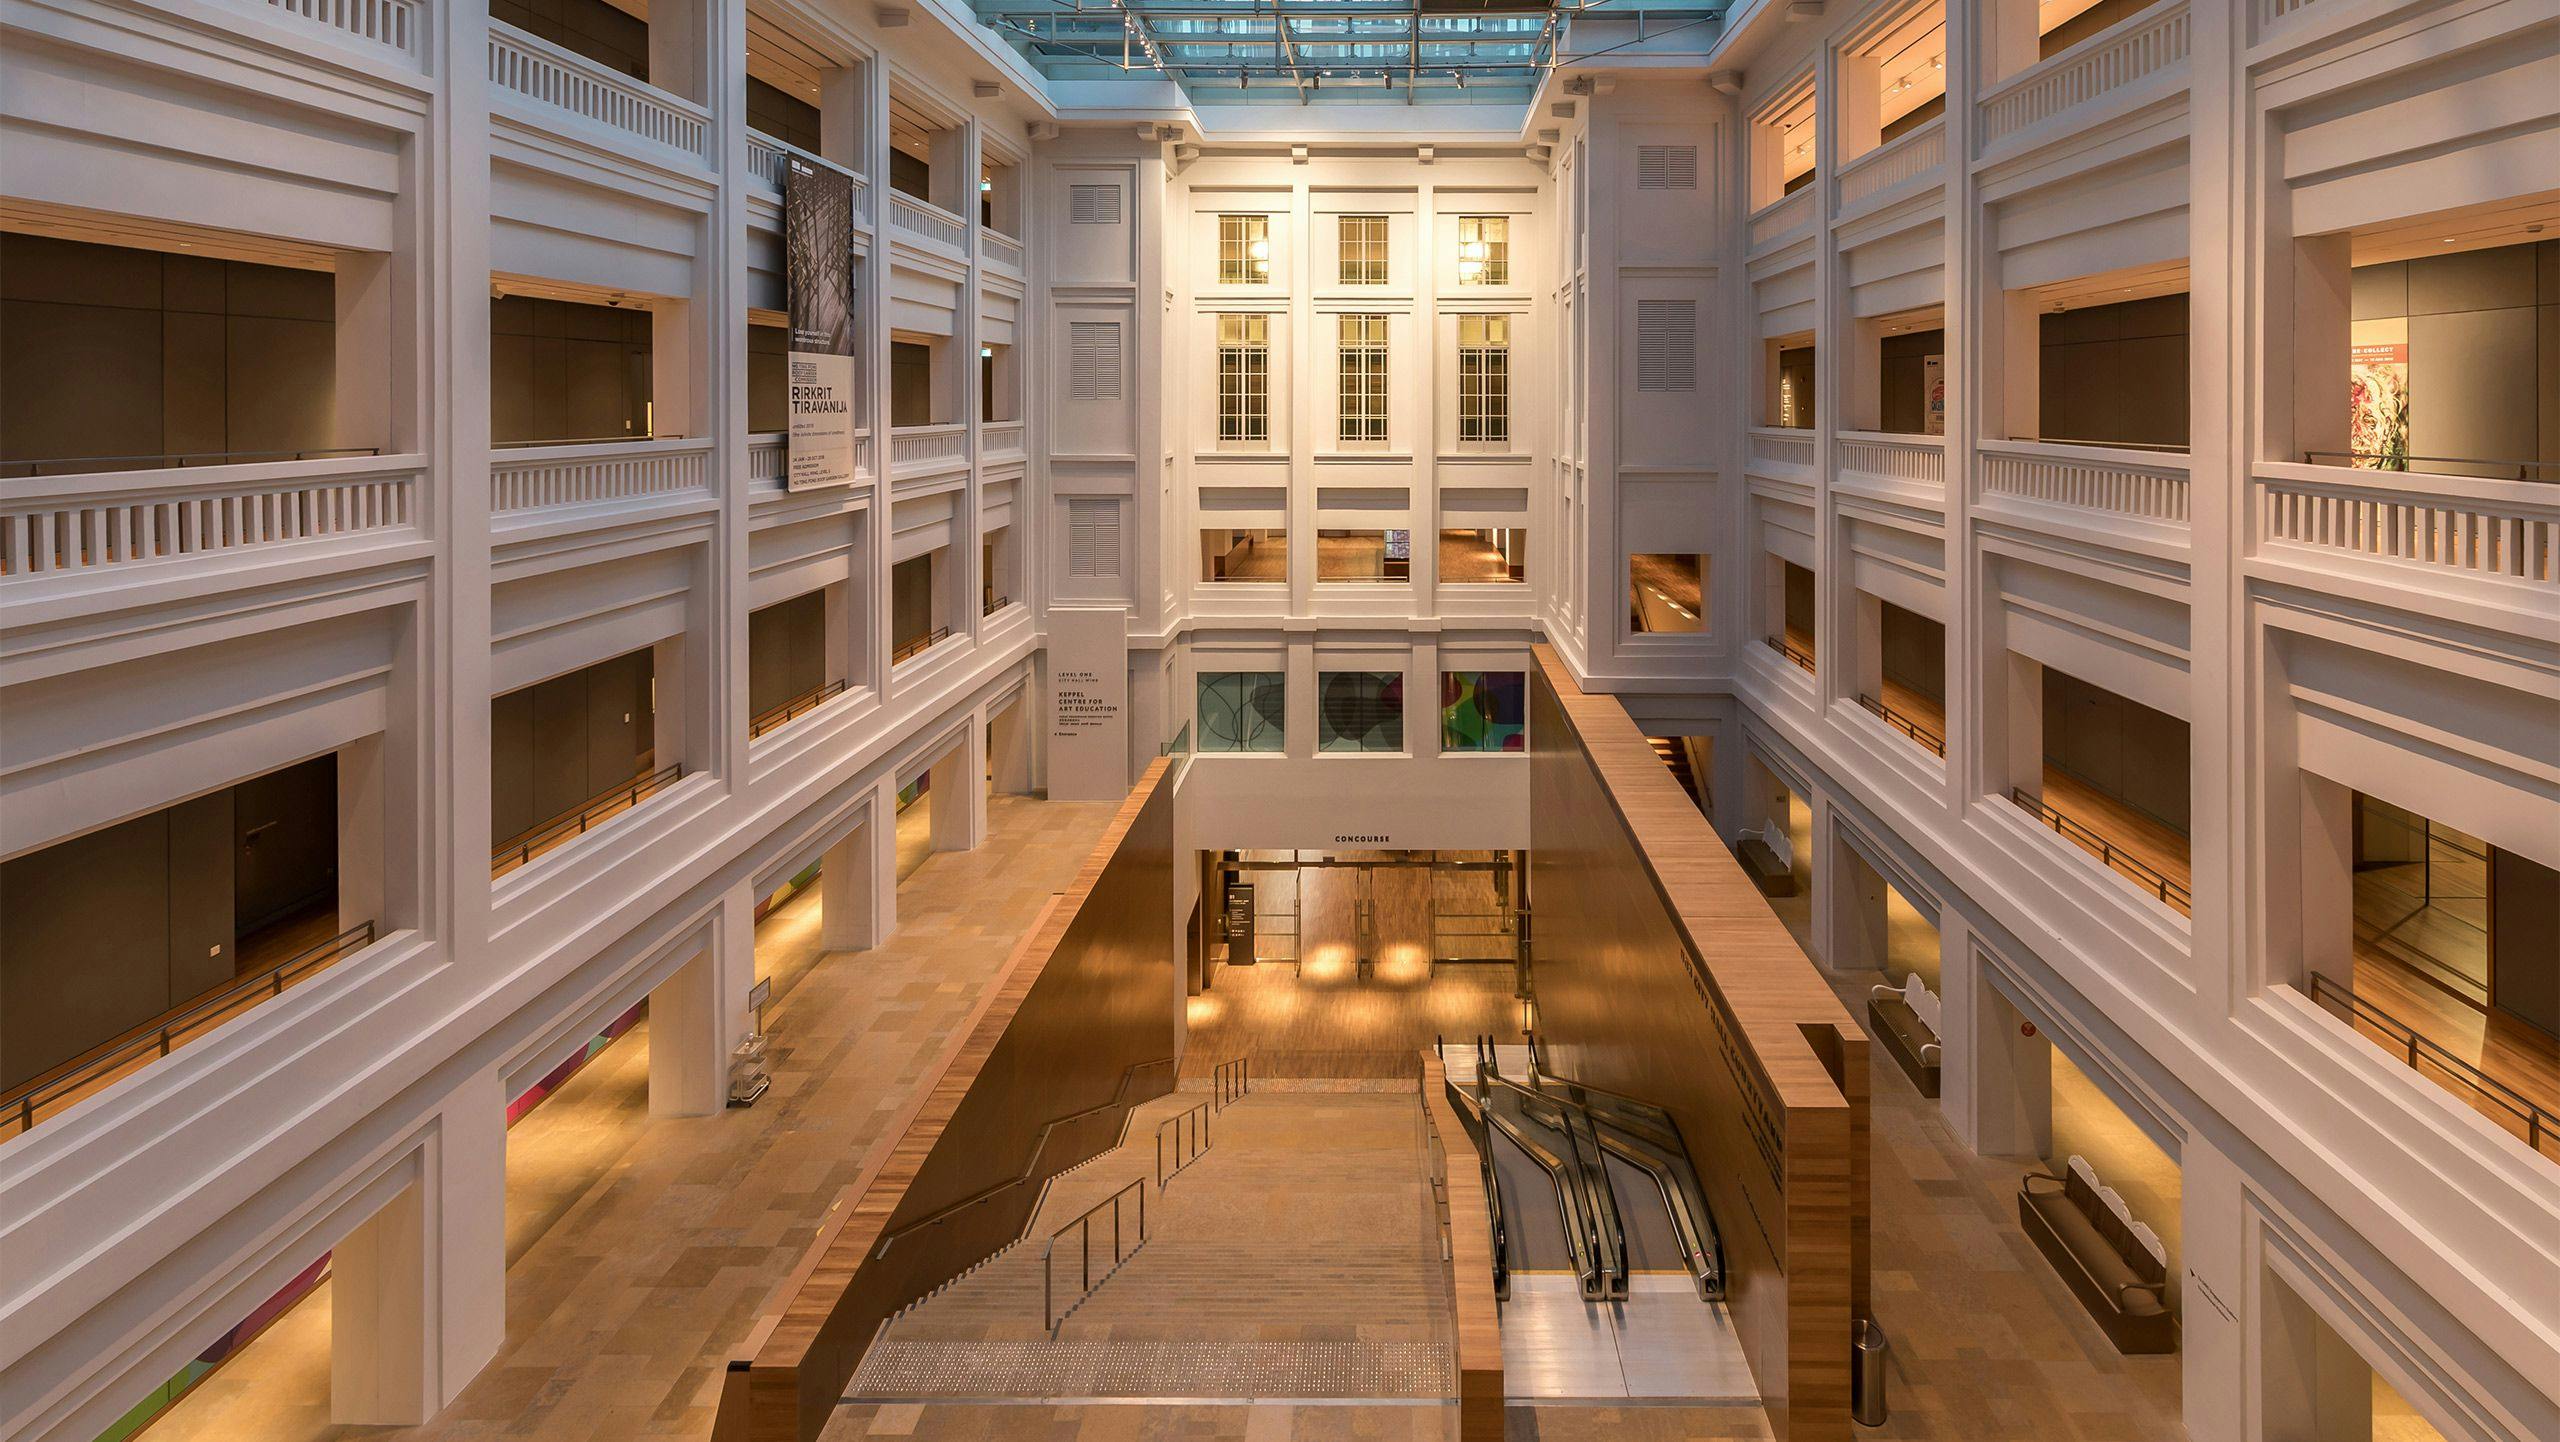 Photograph of the interior of the National Gallery of Singapore by Basile Morin.